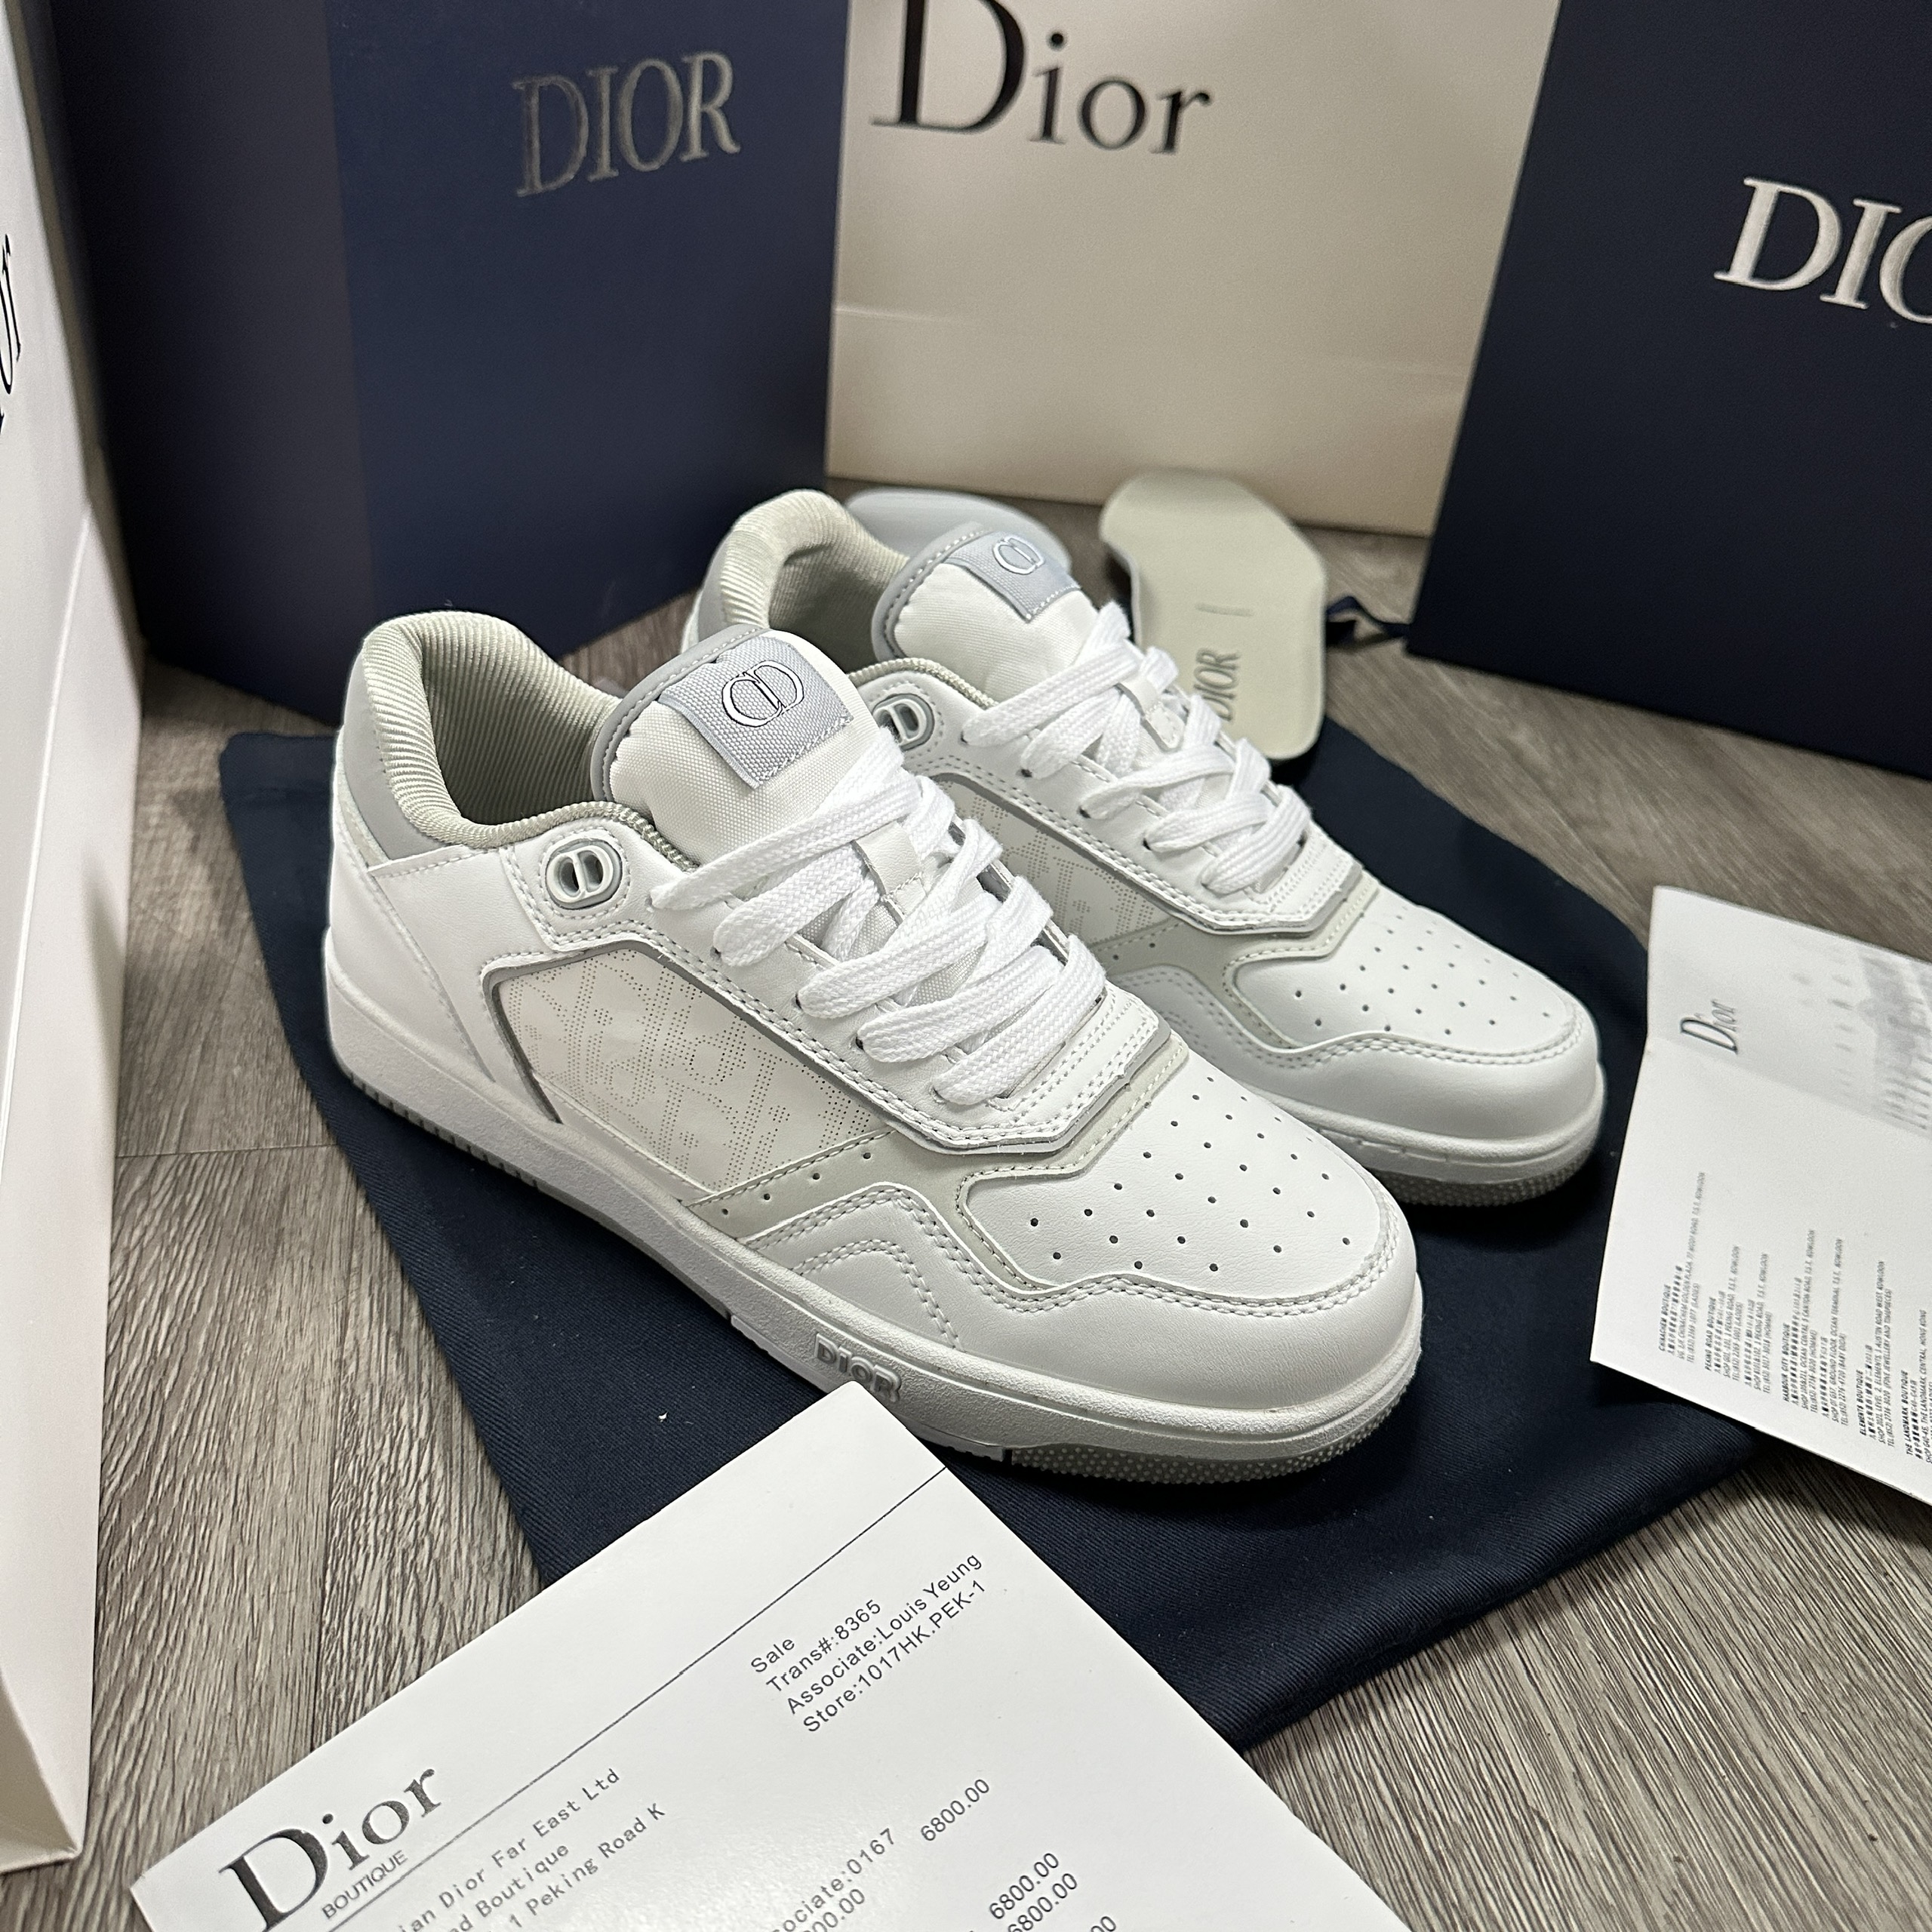 Dior B27 Lowtop Sneaker White and Gray Calfskin  Sneakers white  Sneakers Sneakers outfit